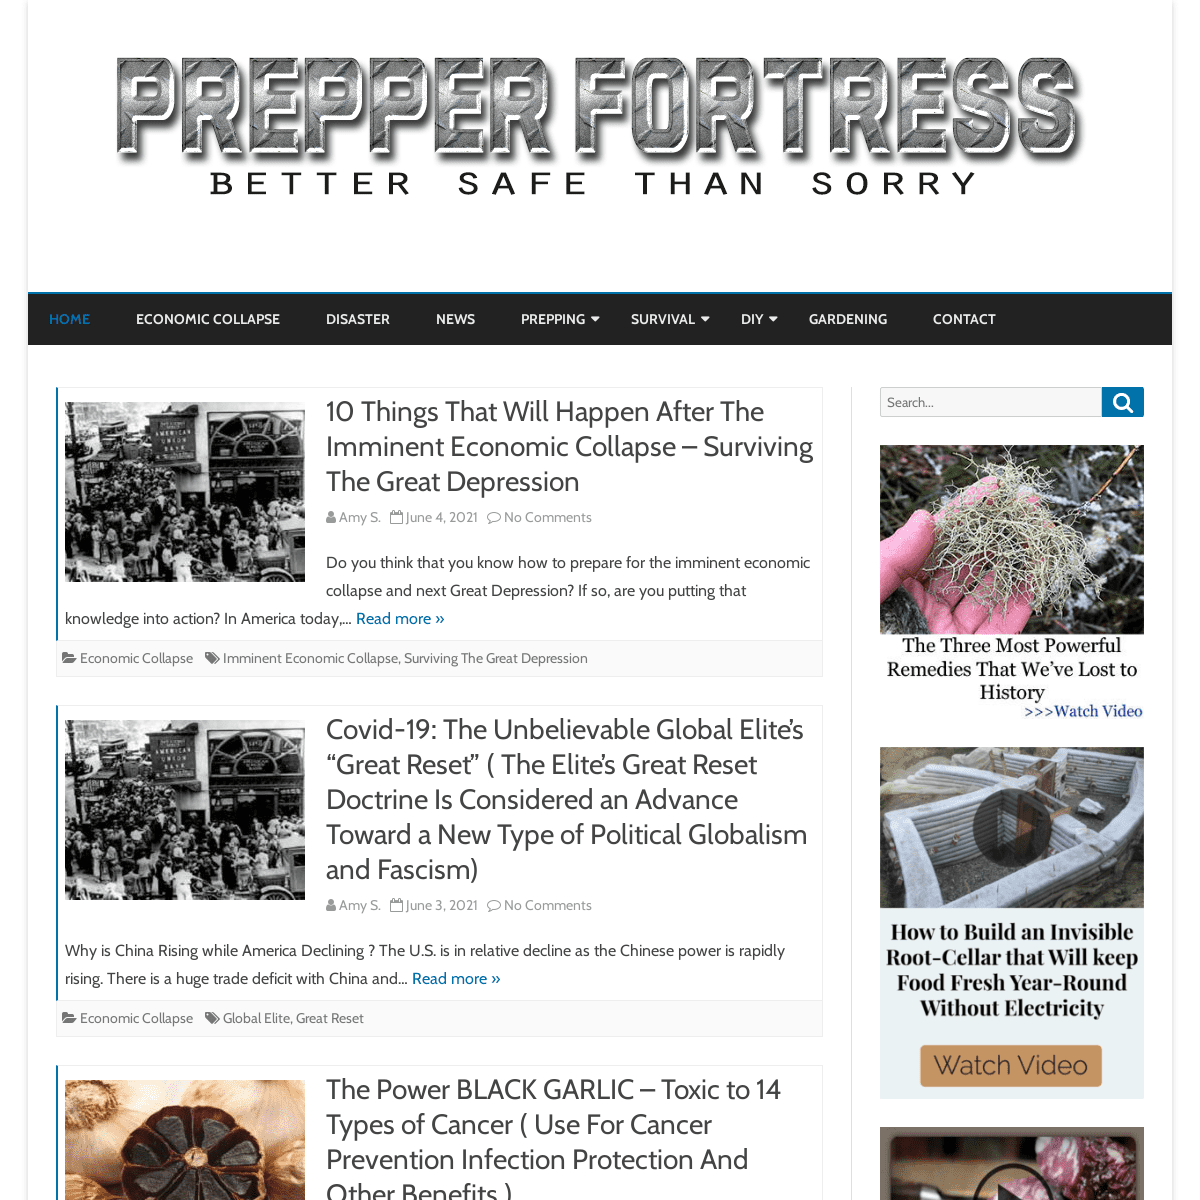 A complete backup of https://prepperfortress.com